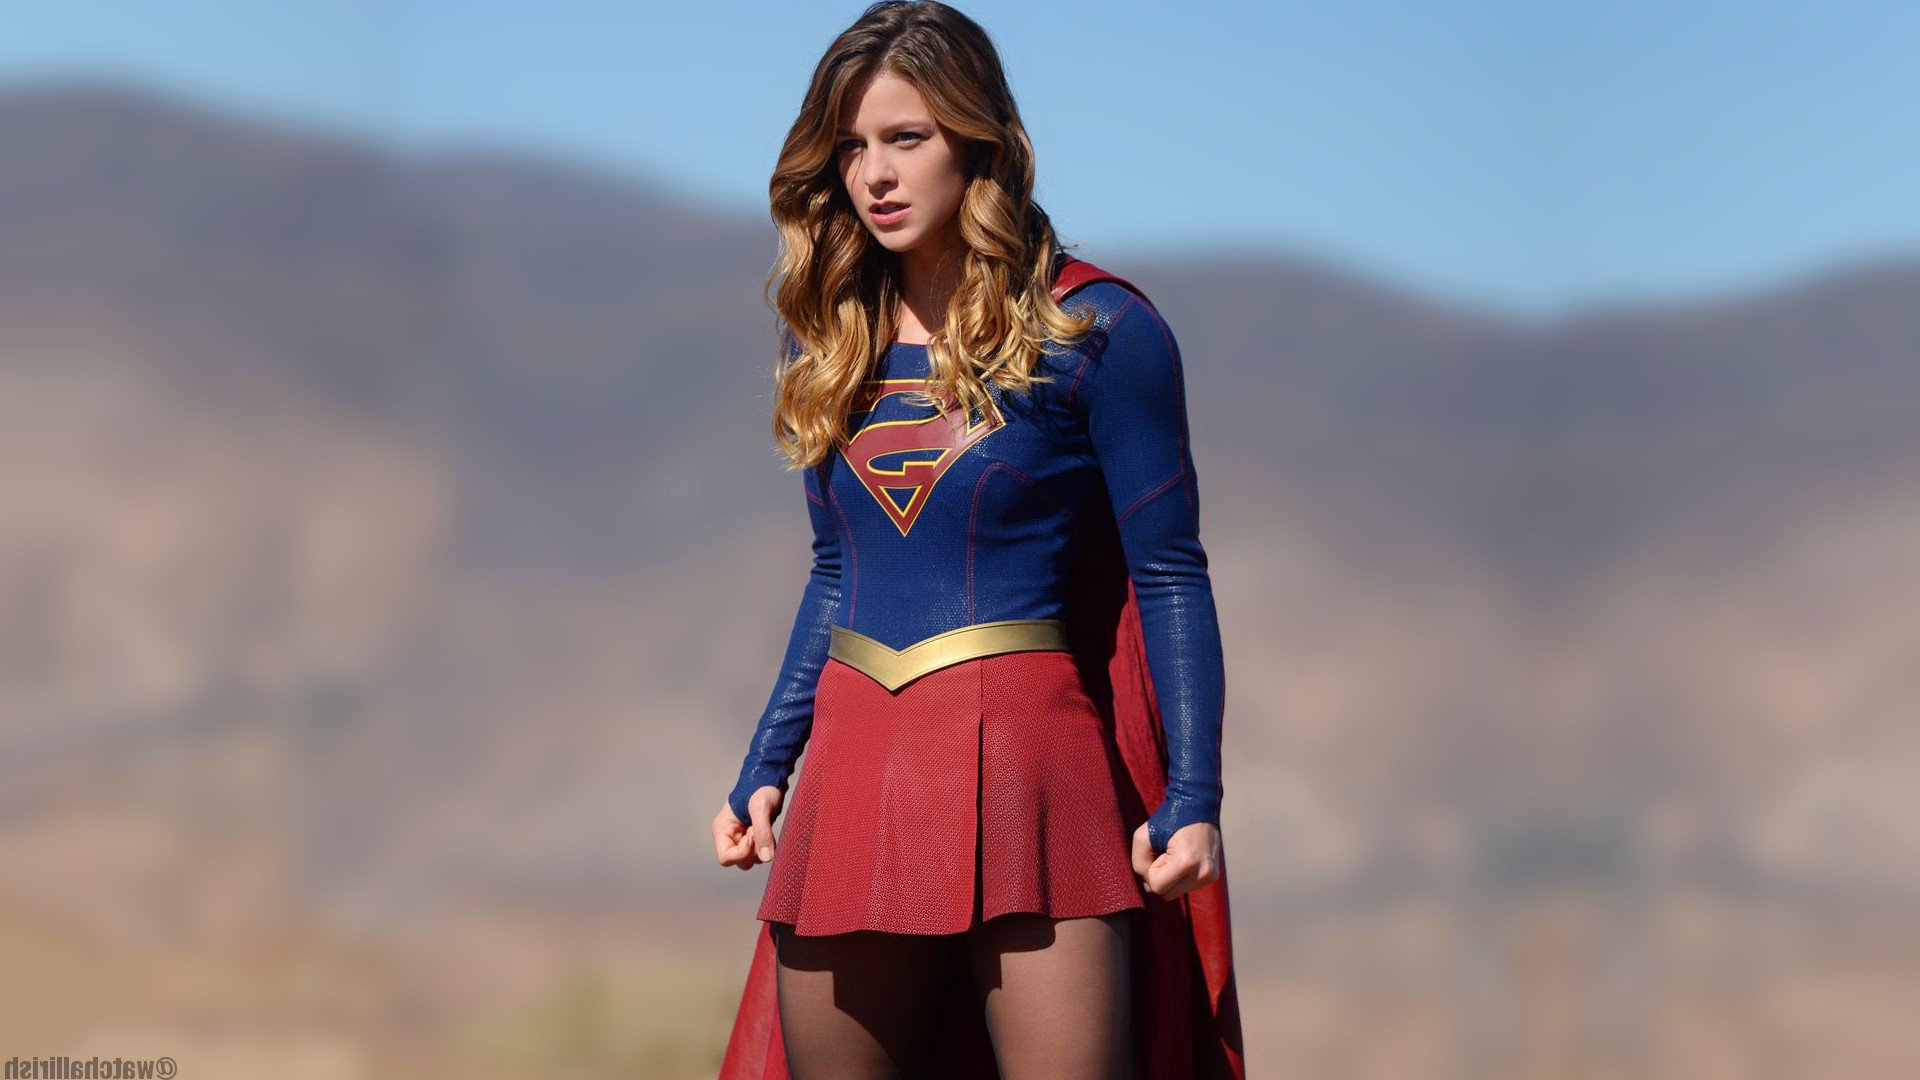 12 Supergirl HD Wallpapers | Page 1